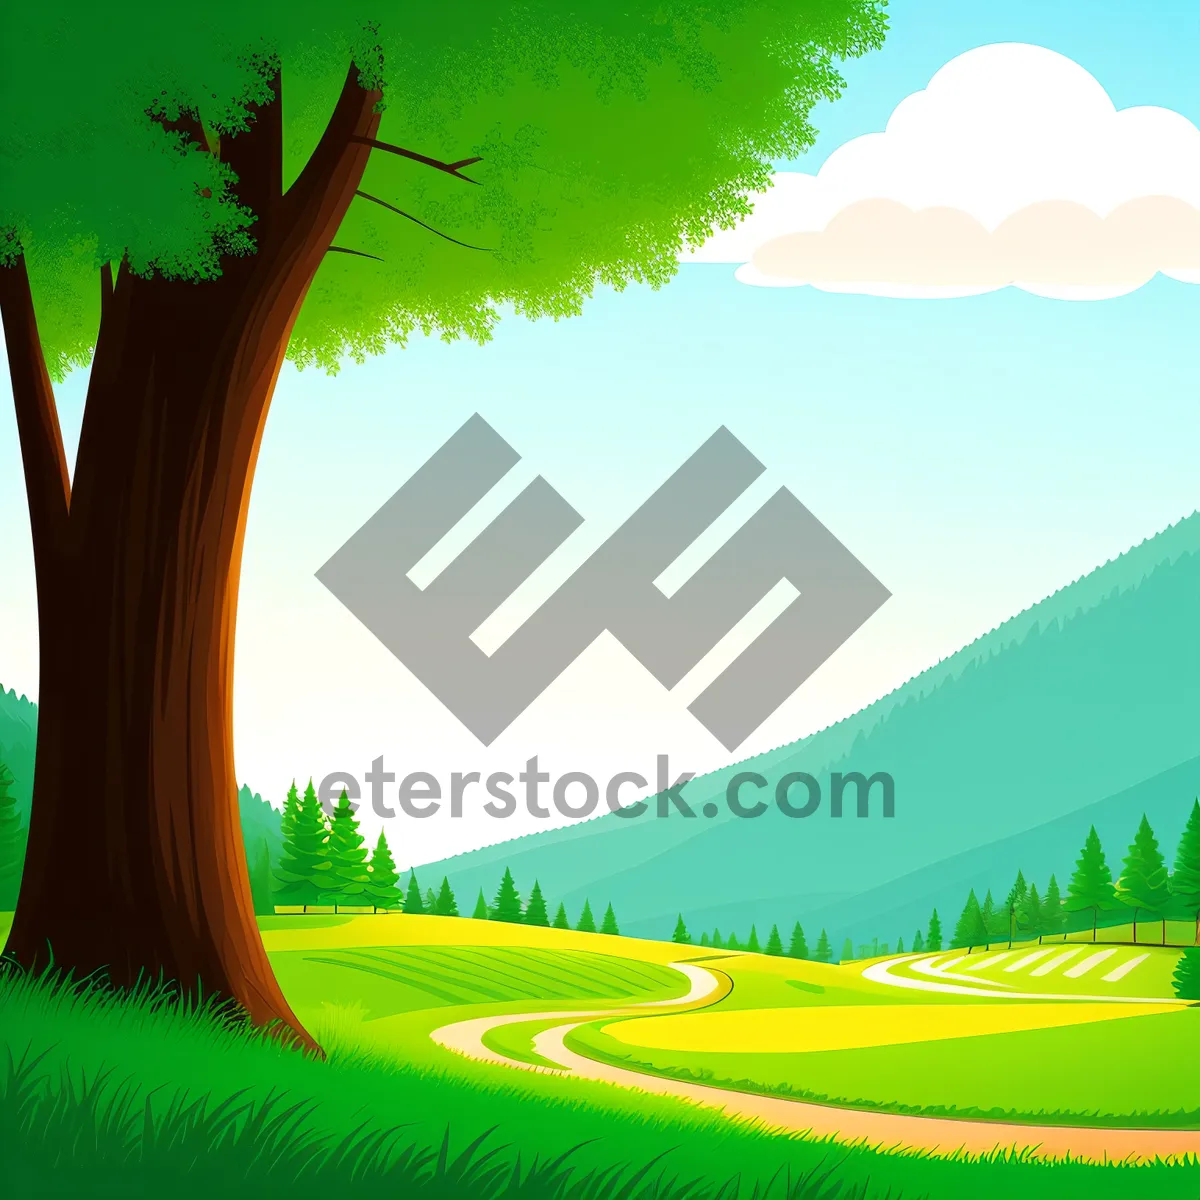 Picture of Idyllic Golf Course in Serene Countryside Setting